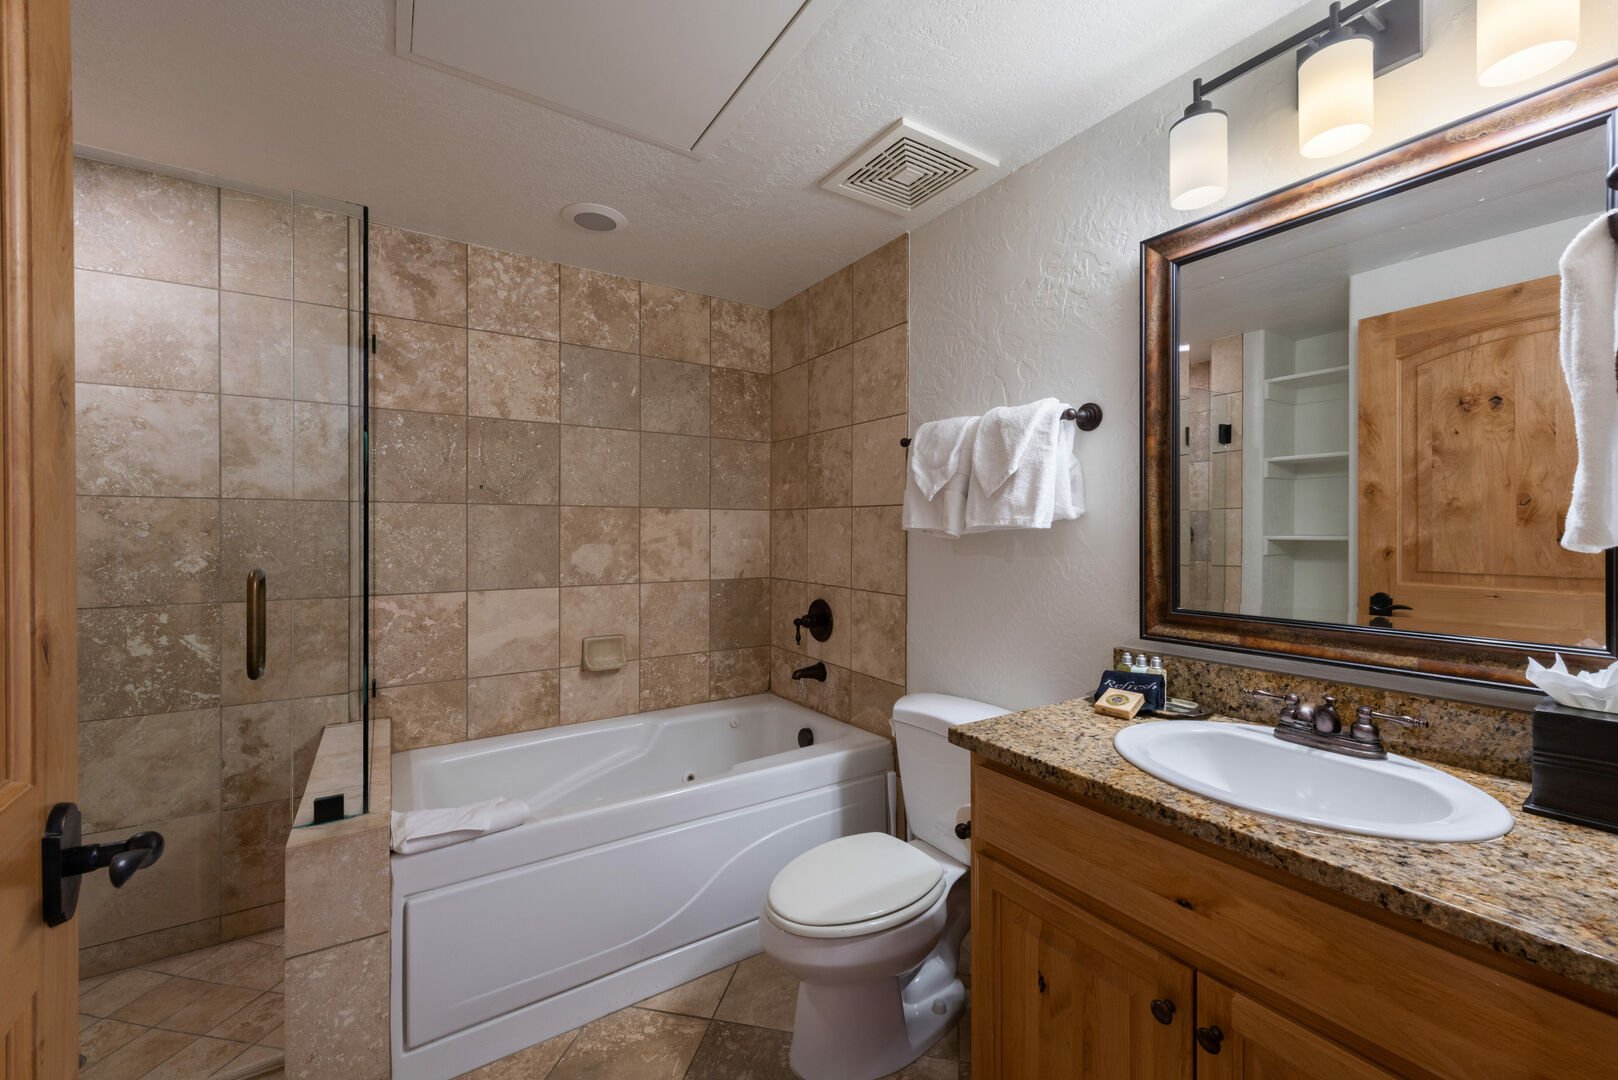 Second master suite bathroom with step in shower and jacuzzi tub